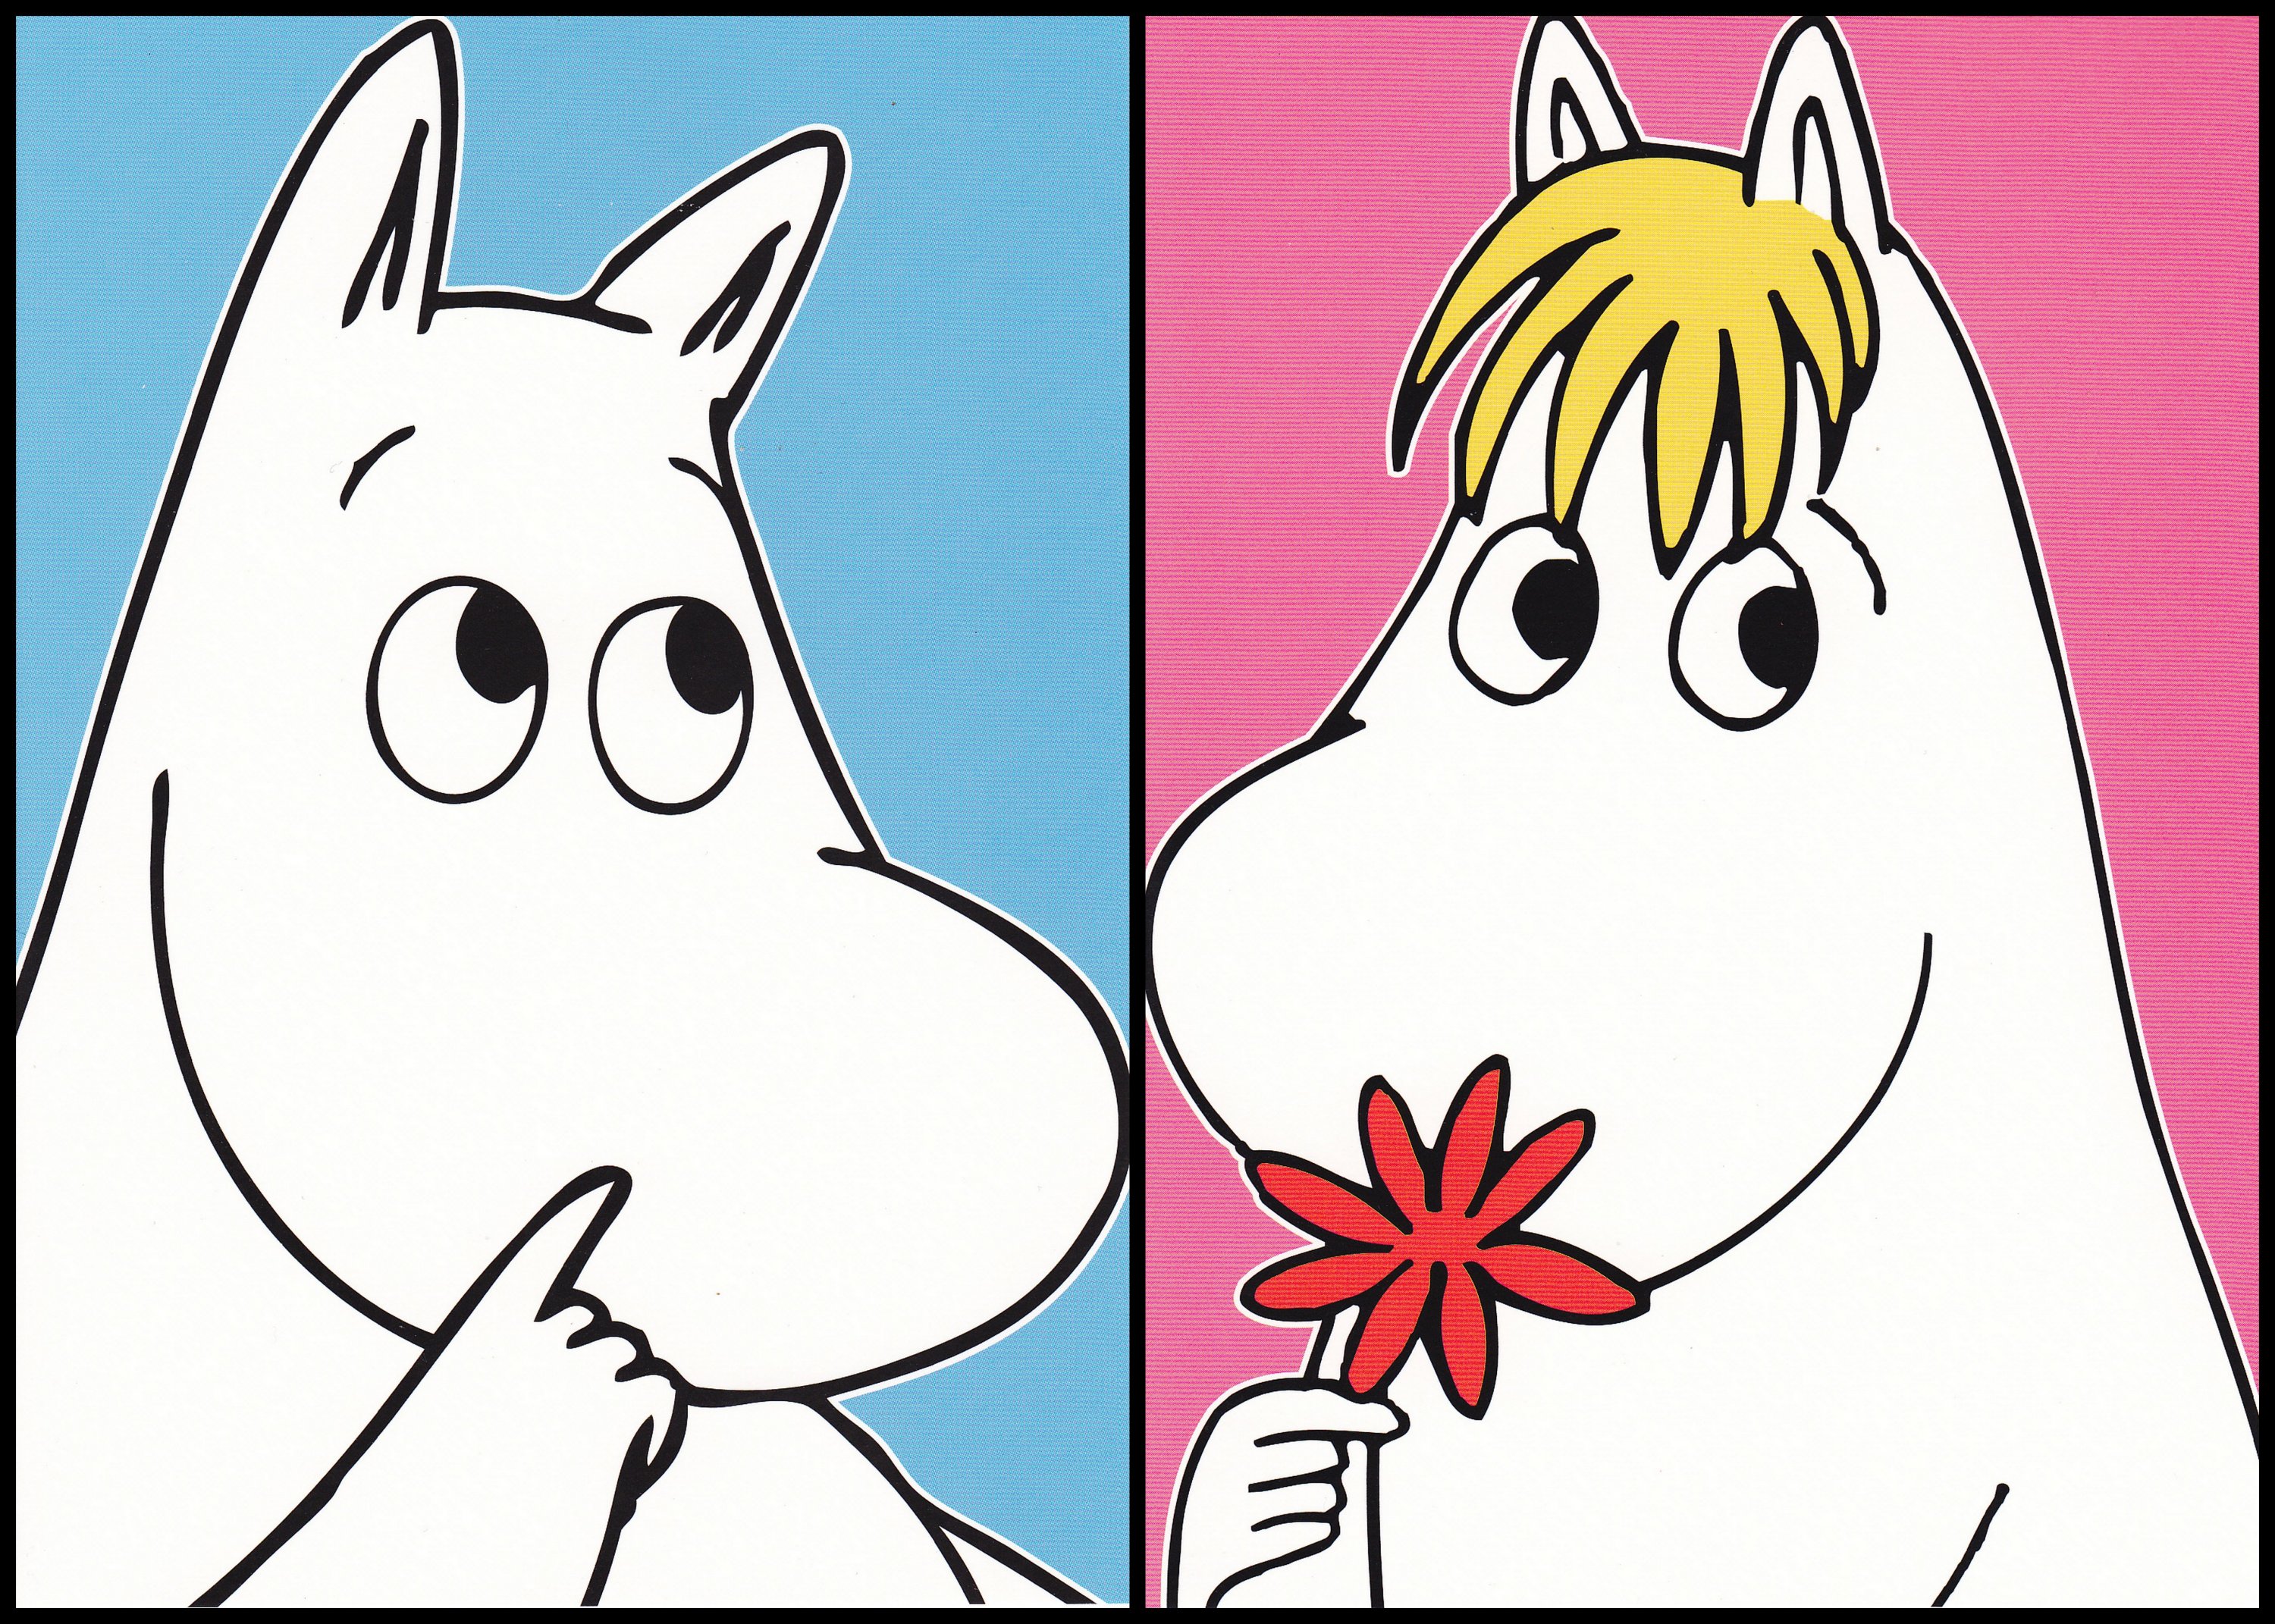 moomin and snorkmaiden cards